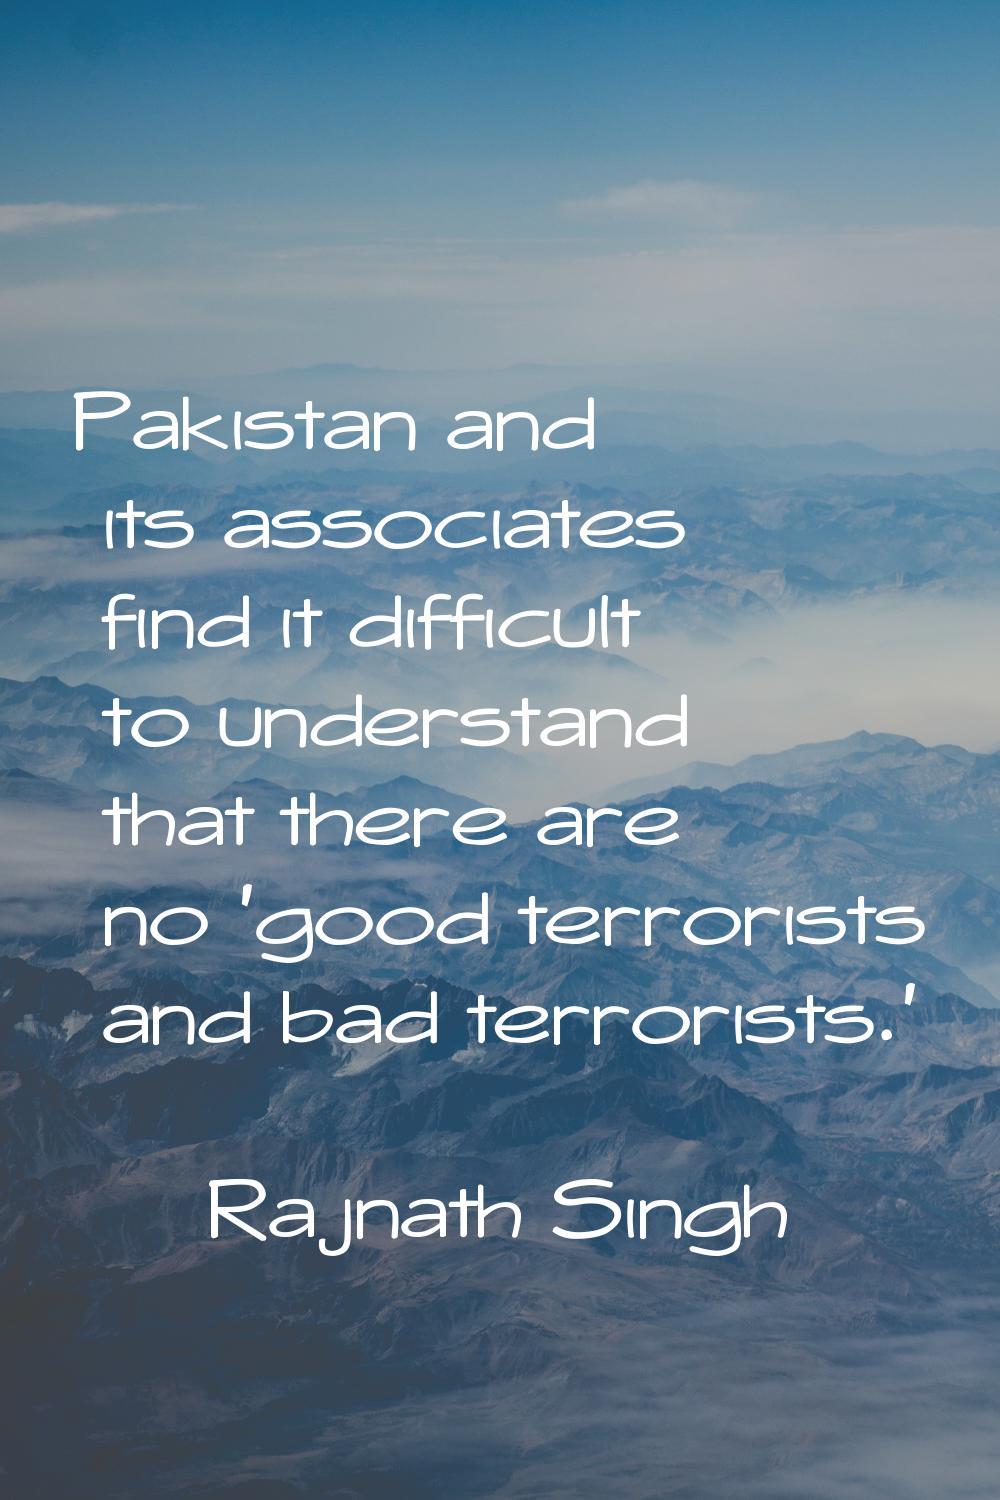 Pakistan and its associates find it difficult to understand that there are no 'good terrorists and 